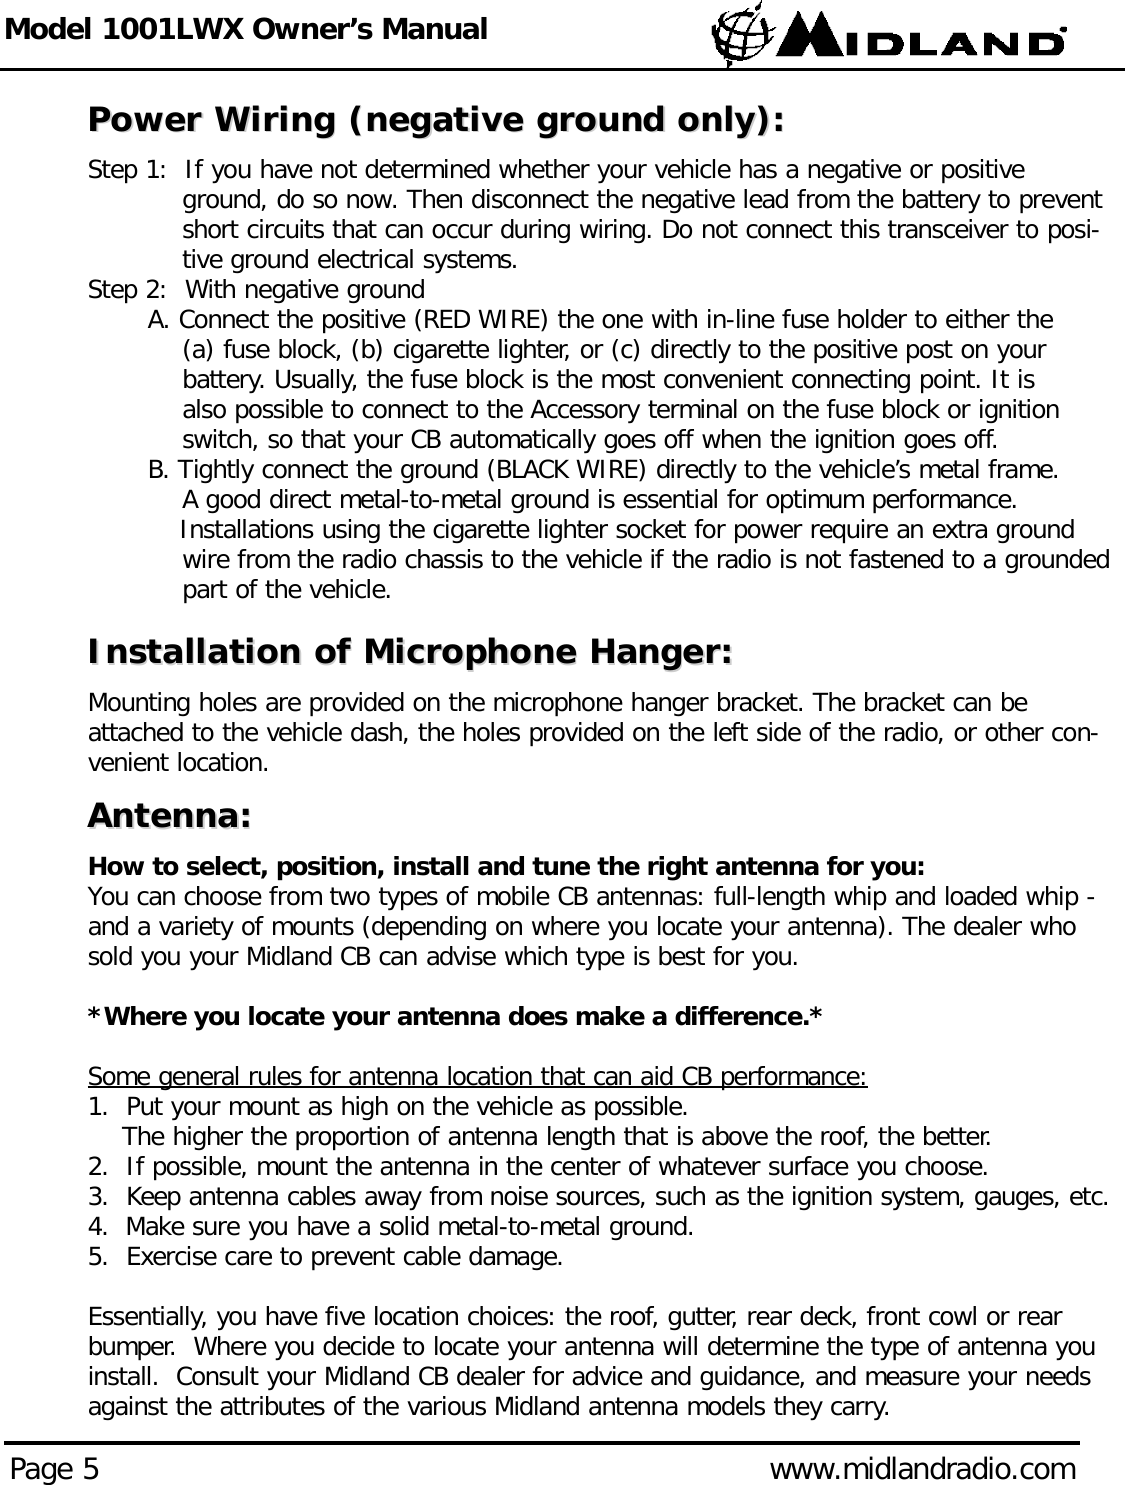 Model 1001LWX Owner’s ManualPage 5 www.midlandradio.comPower Wiring (negative ground only):Power Wiring (negative ground only):Step 1:  If you have not determined whether your vehicle has a negative or positive ground, do so now. Then disconnect the negative lead from the battery to prevent short circuits that can occur during wiring. Do not connect this transceiver to posi-tive ground electrical systems.Step 2:  With negative groundA. Connect the positive (RED WIRE) the one with in-line fuse holder to either the (a) fuse block, (b) cigarette lighter, or (c) directly to the positive post on your battery. Usually, the fuse block is the most convenient connecting point. It is also possible to connect to the Accessory terminal on the fuse block or ignition switch, so that your CB automatically goes off when the ignition goes off.B. Tightly connect the ground (BLACK WIRE) directly to the vehicle’s metal frame. A good direct metal-to-metal ground is essential for optimum performance.Installations using the cigarette lighter socket for power require an extra ground wire from the radio chassis to the vehicle if the radio is not fastened to a grounded part of the vehicle.Installation of Microphone Hanger:Installation of Microphone Hanger:Mounting holes are provided on the microphone hanger bracket. The bracket can beattached to the vehicle dash, the holes provided on the left side of the radio, or other con-venient location.Antenna:Antenna:How to select, position, install and tune the right antenna for you:You can choose from two types of mobile CB antennas: full-length whip and loaded whip -and a variety of mounts (depending on where you locate your antenna). The dealer whosold you your Midland CB can advise which type is best for you.*Where you locate your antenna does make a difference.*Some general rules for antenna location that can aid CB performance:1.  Put your mount as high on the vehicle as possible.The higher the proportion of antenna length that is above the roof, the better.2.  If possible, mount the antenna in the center of whatever surface you choose.3.  Keep antenna cables away from noise sources, such as the ignition system, gauges, etc.4.  Make sure you have a solid metal-to-metal ground.5.  Exercise care to prevent cable damage.Essentially, you have five location choices: the roof, gutter, rear deck, front cowl or rearbumper.  Where you decide to locate your antenna will determine the type of antenna youinstall.  Consult your Midland CB dealer for advice and guidance, and measure your needsagainst the attributes of the various Midland antenna models they carry.